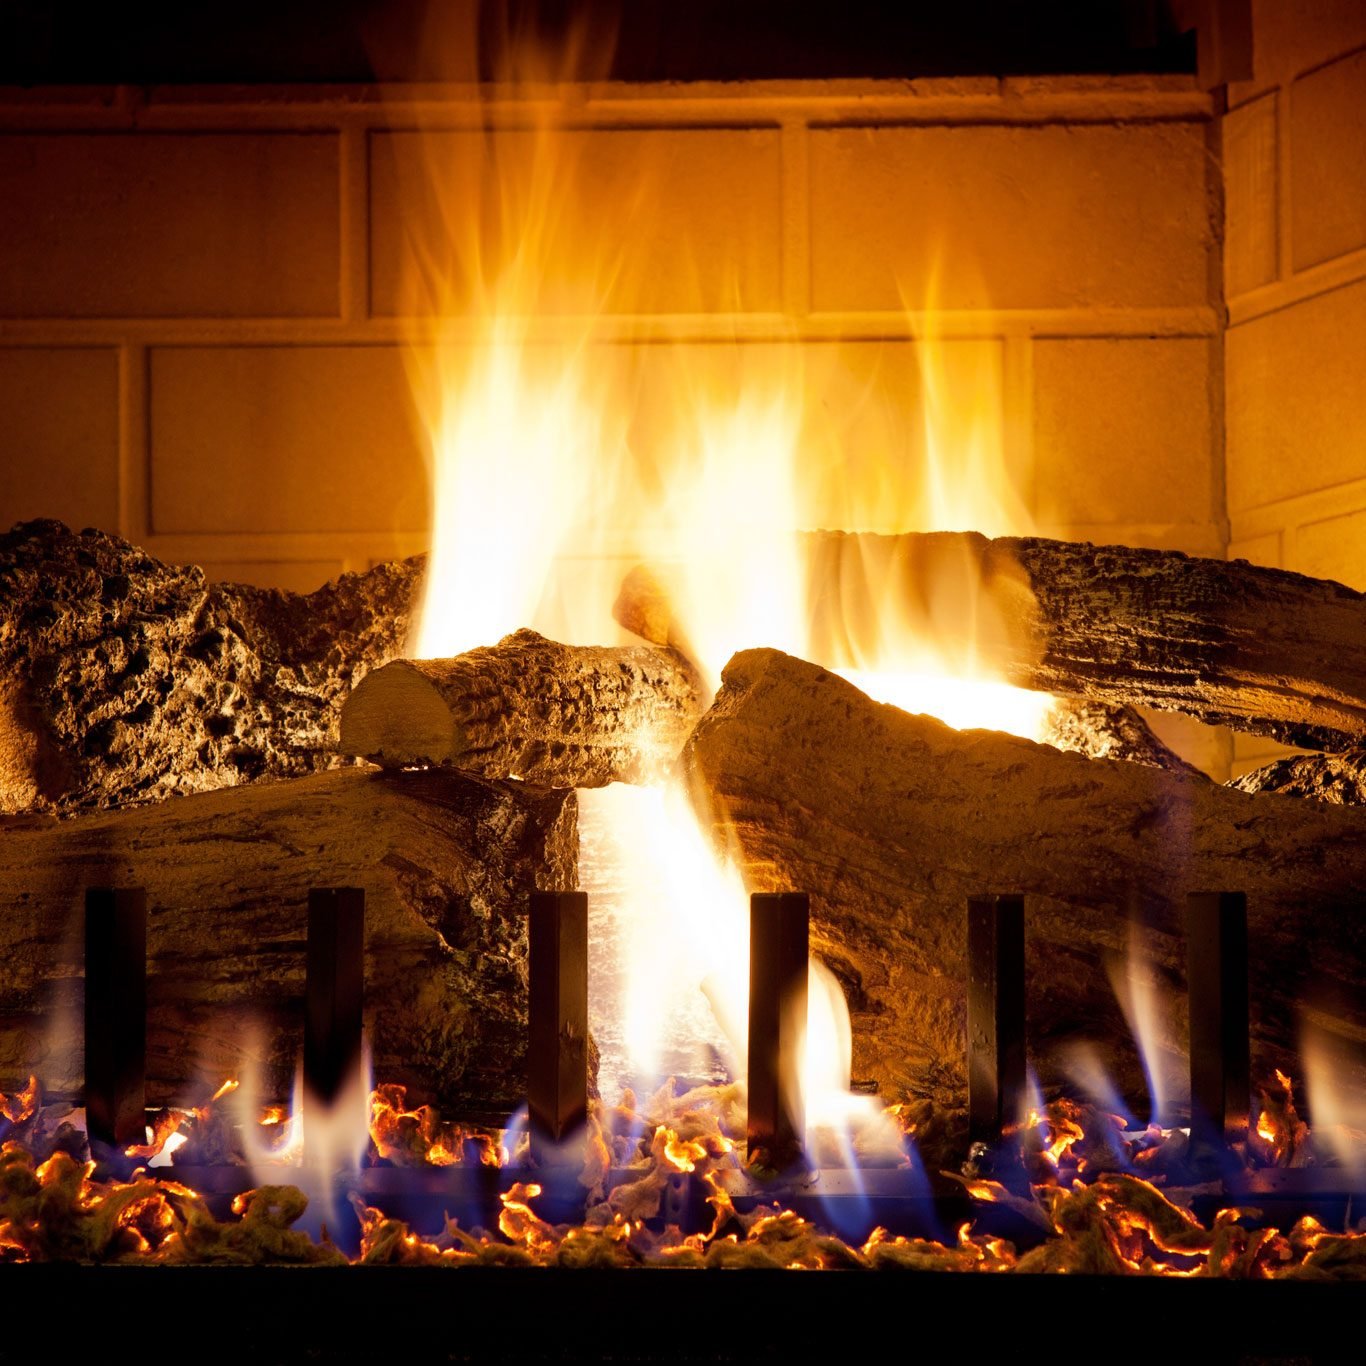 Gas Fireplace Accessories, Fireplace Products